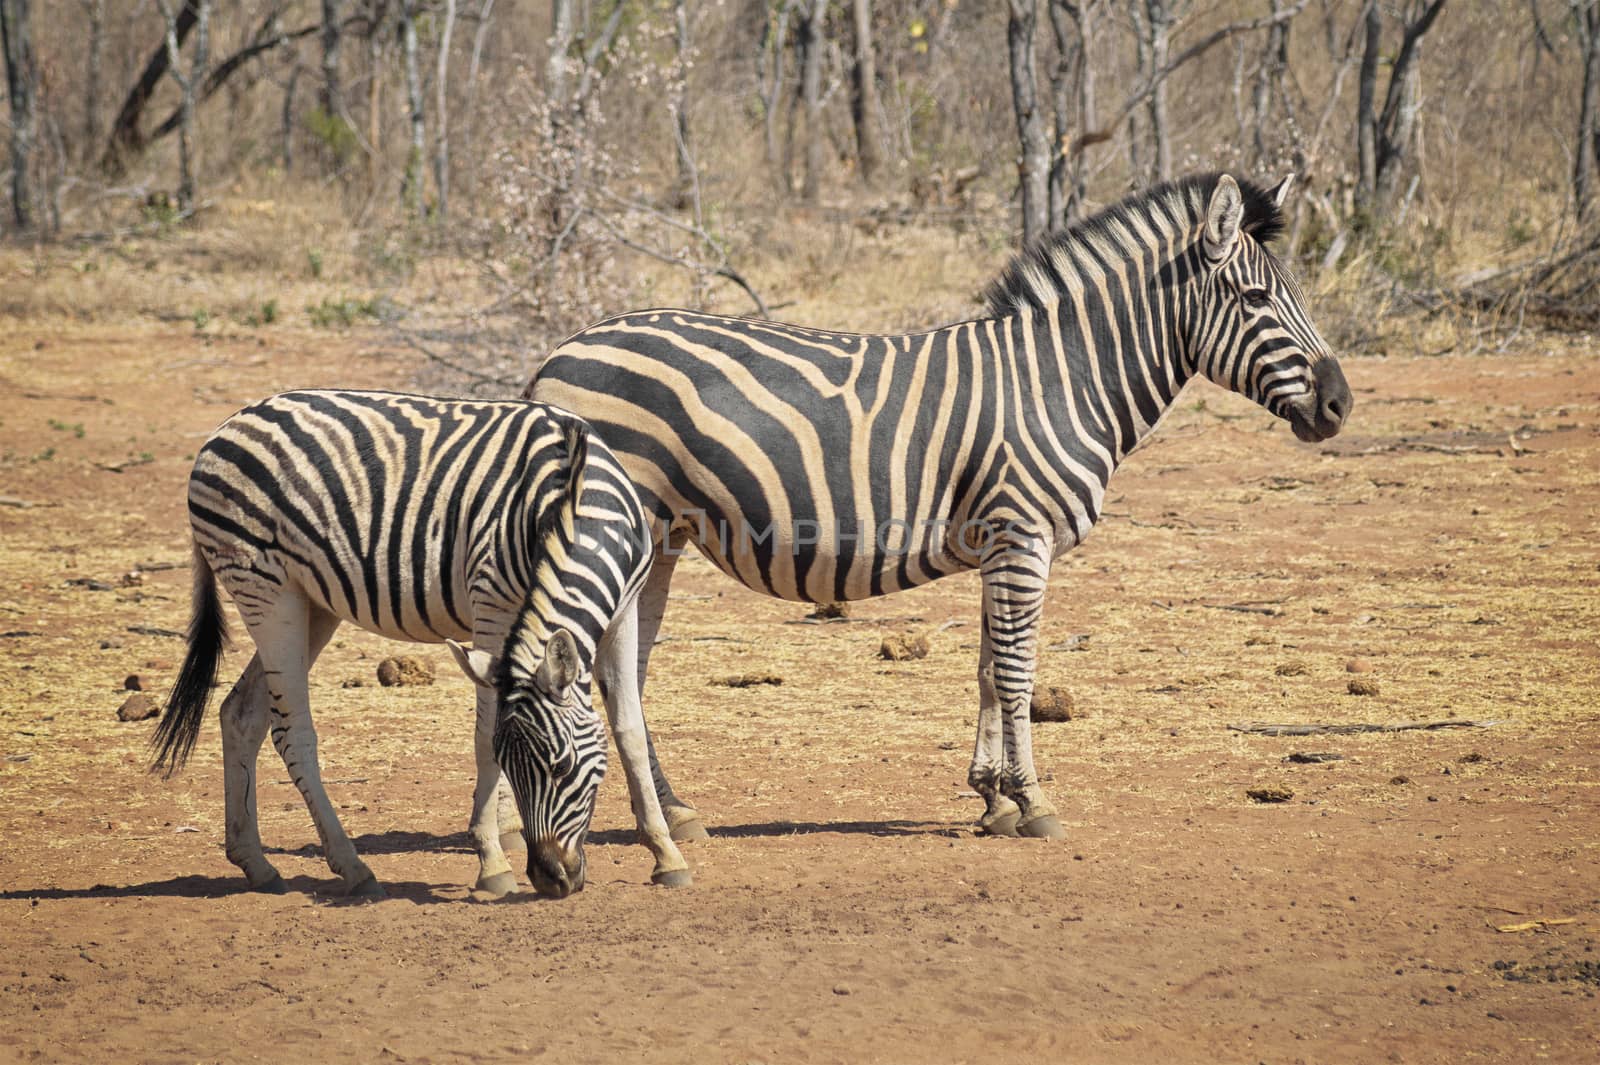 Zebras on the dry savannah looking for food by Sportactive